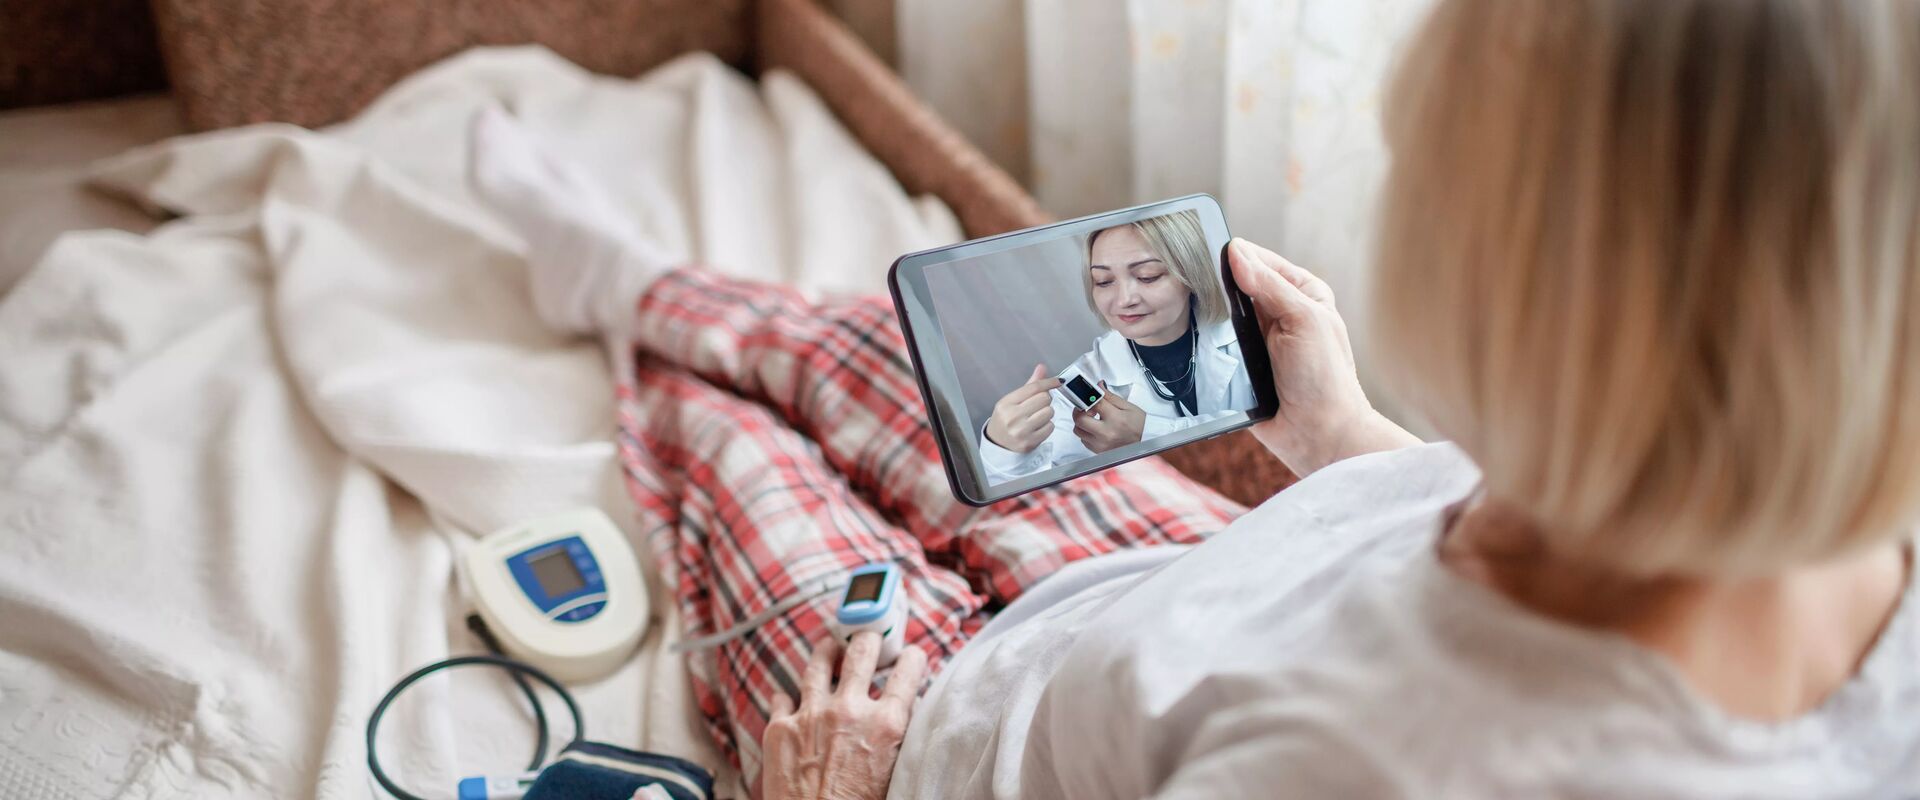 7 Ways Virtual Healthcare Solutions Are Pioneering the Future of Medical Care